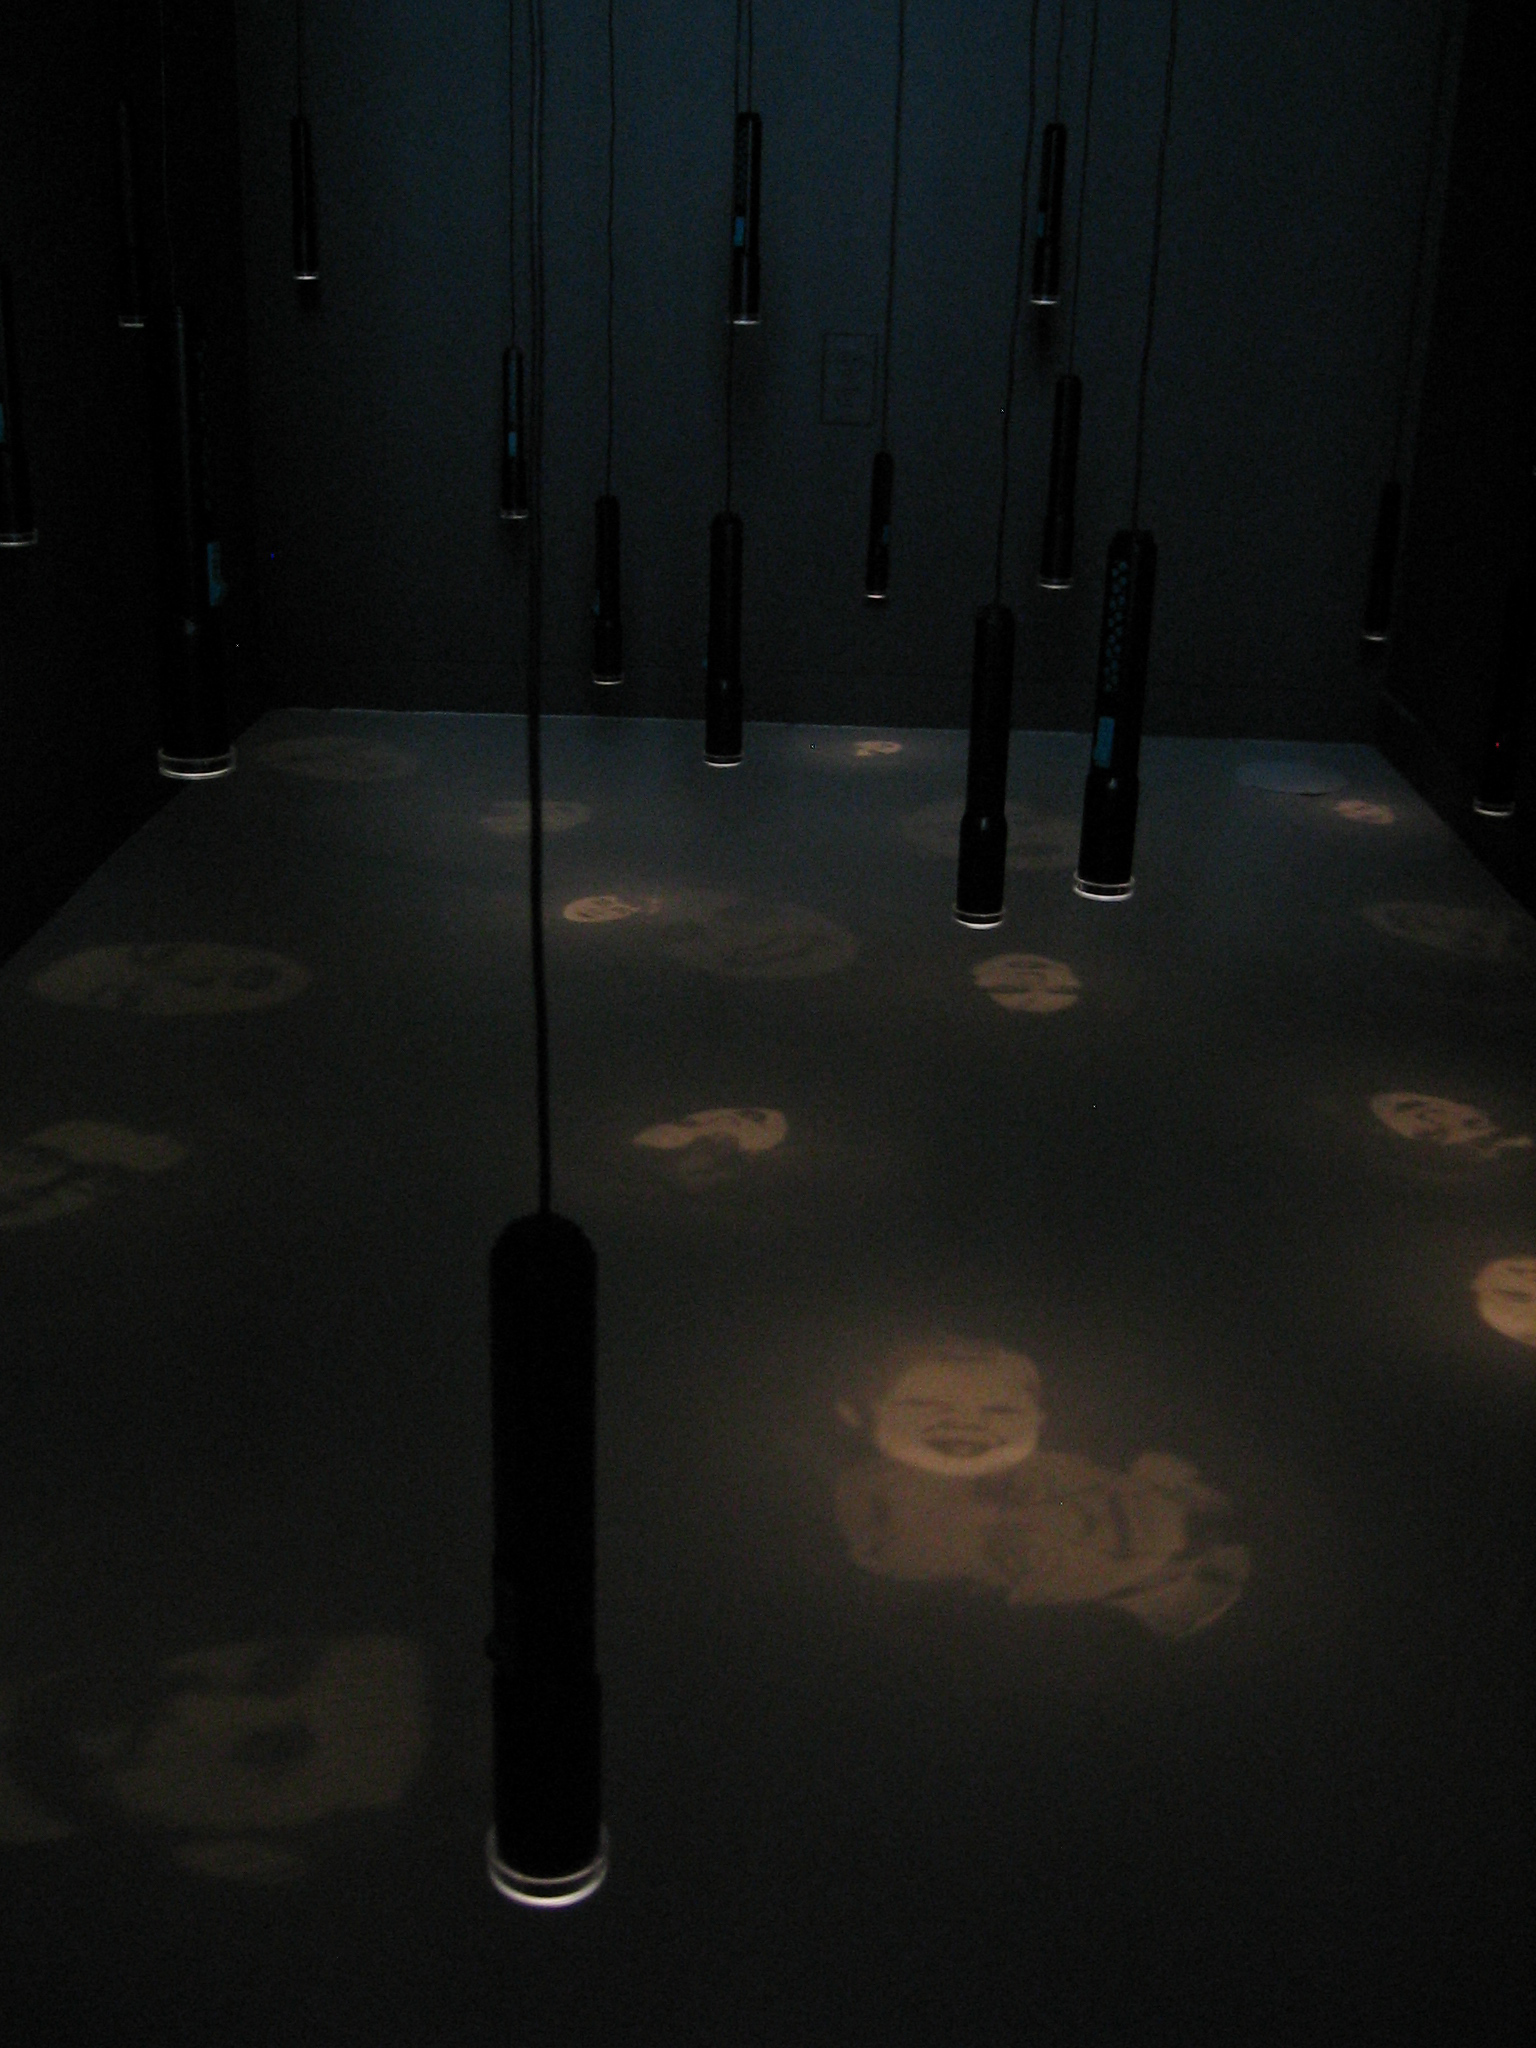 Flashlights projecting faces hang down from a dark gallery ceiling